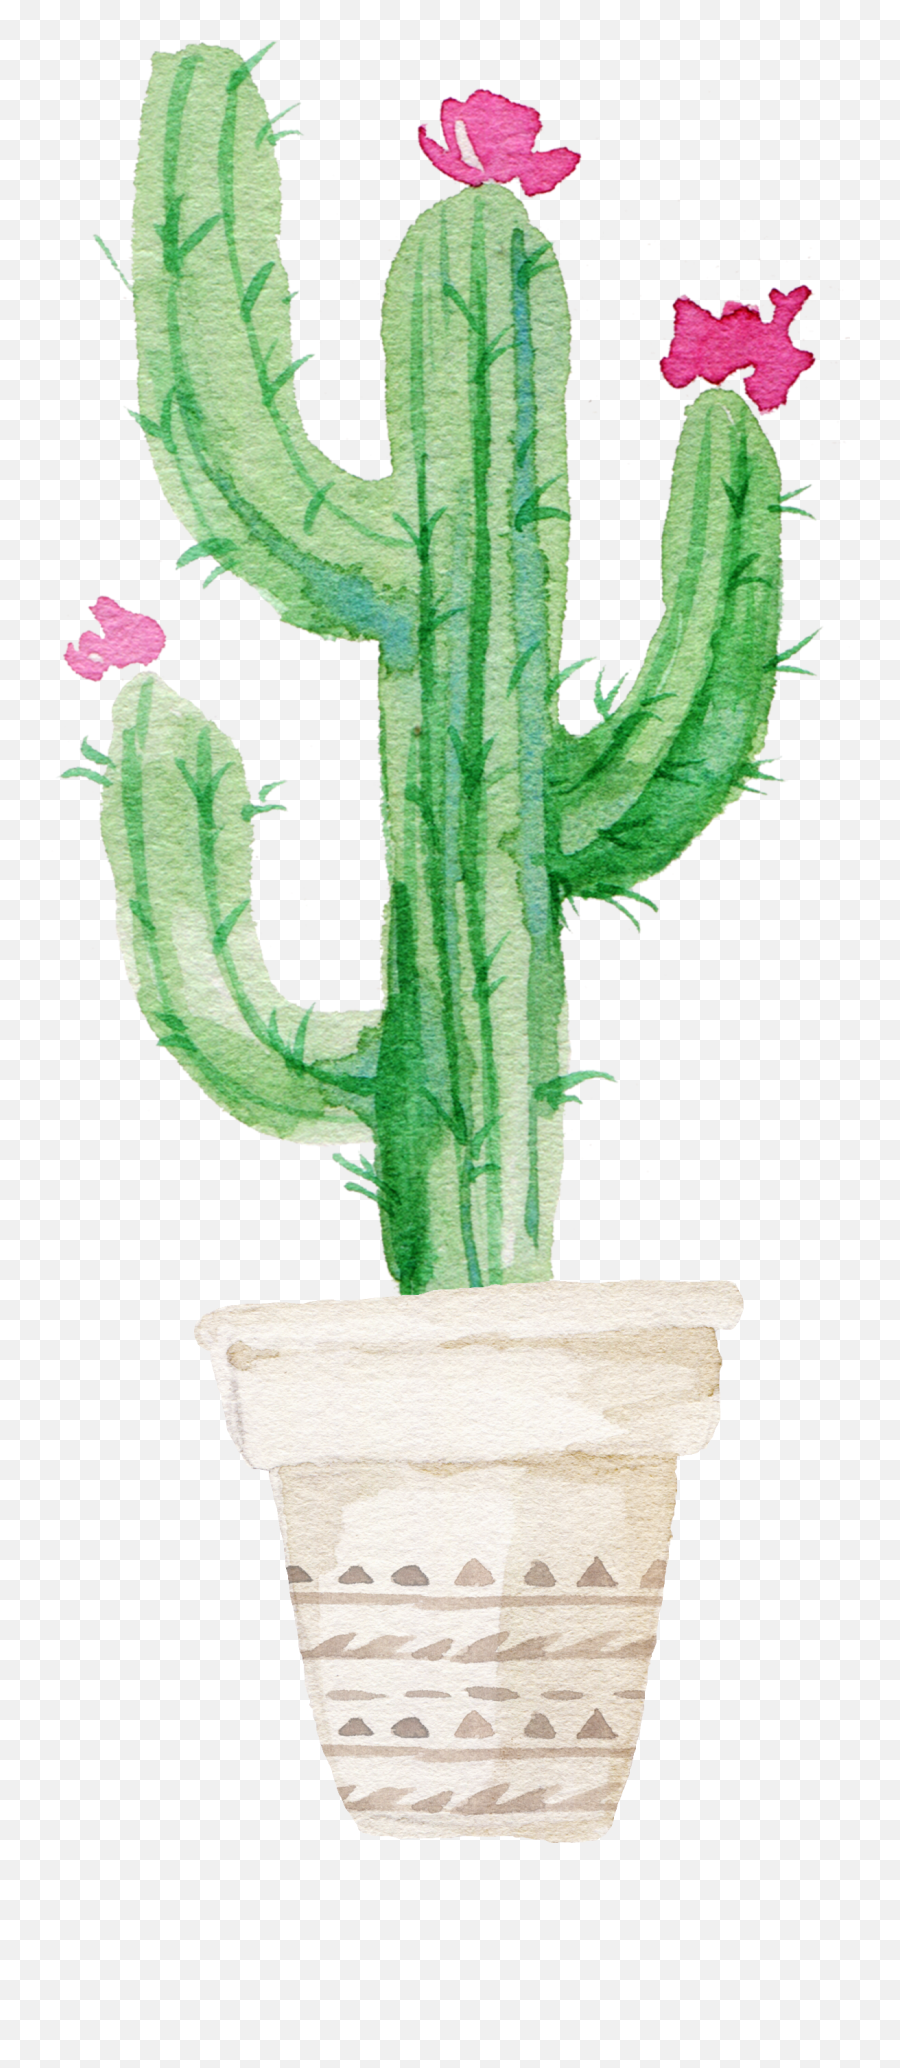 Watercolor Cactus Png Image With No - Flower Cactus Drawing Emoji,Cactus Transparent Background